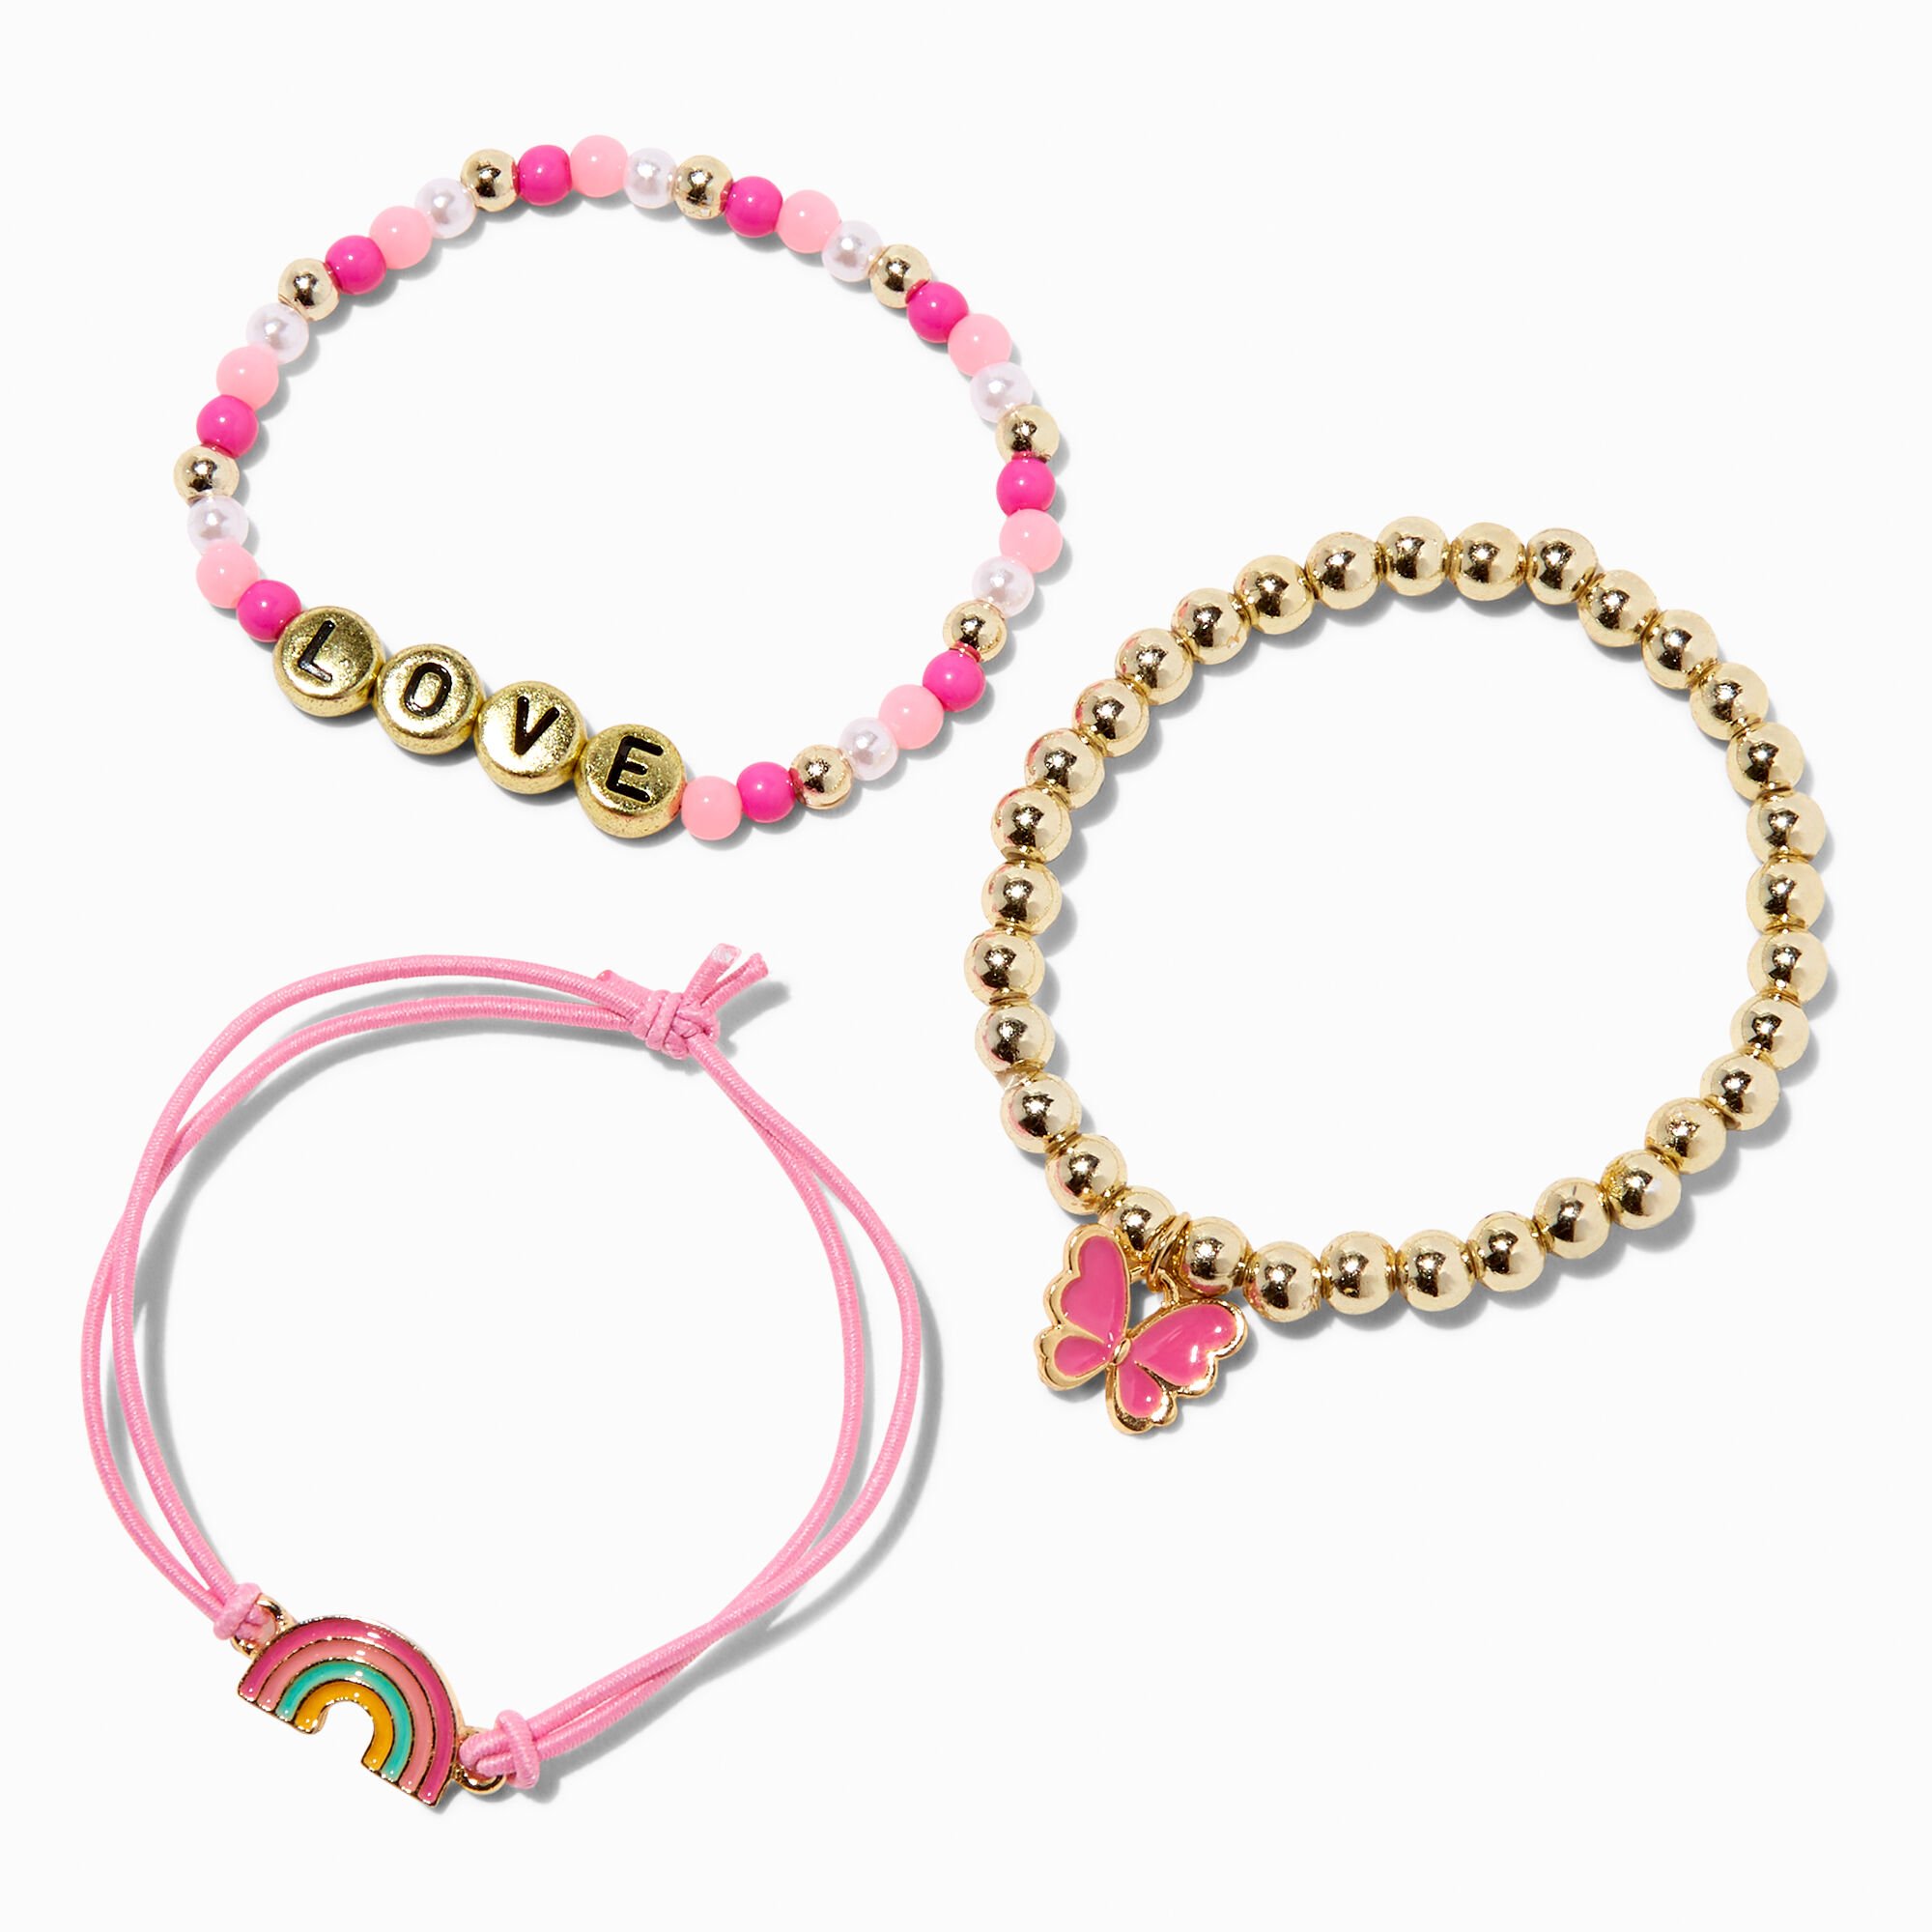 View Claires Club Love Pearl Beaded Adjustable Bracelets 3 Pack information